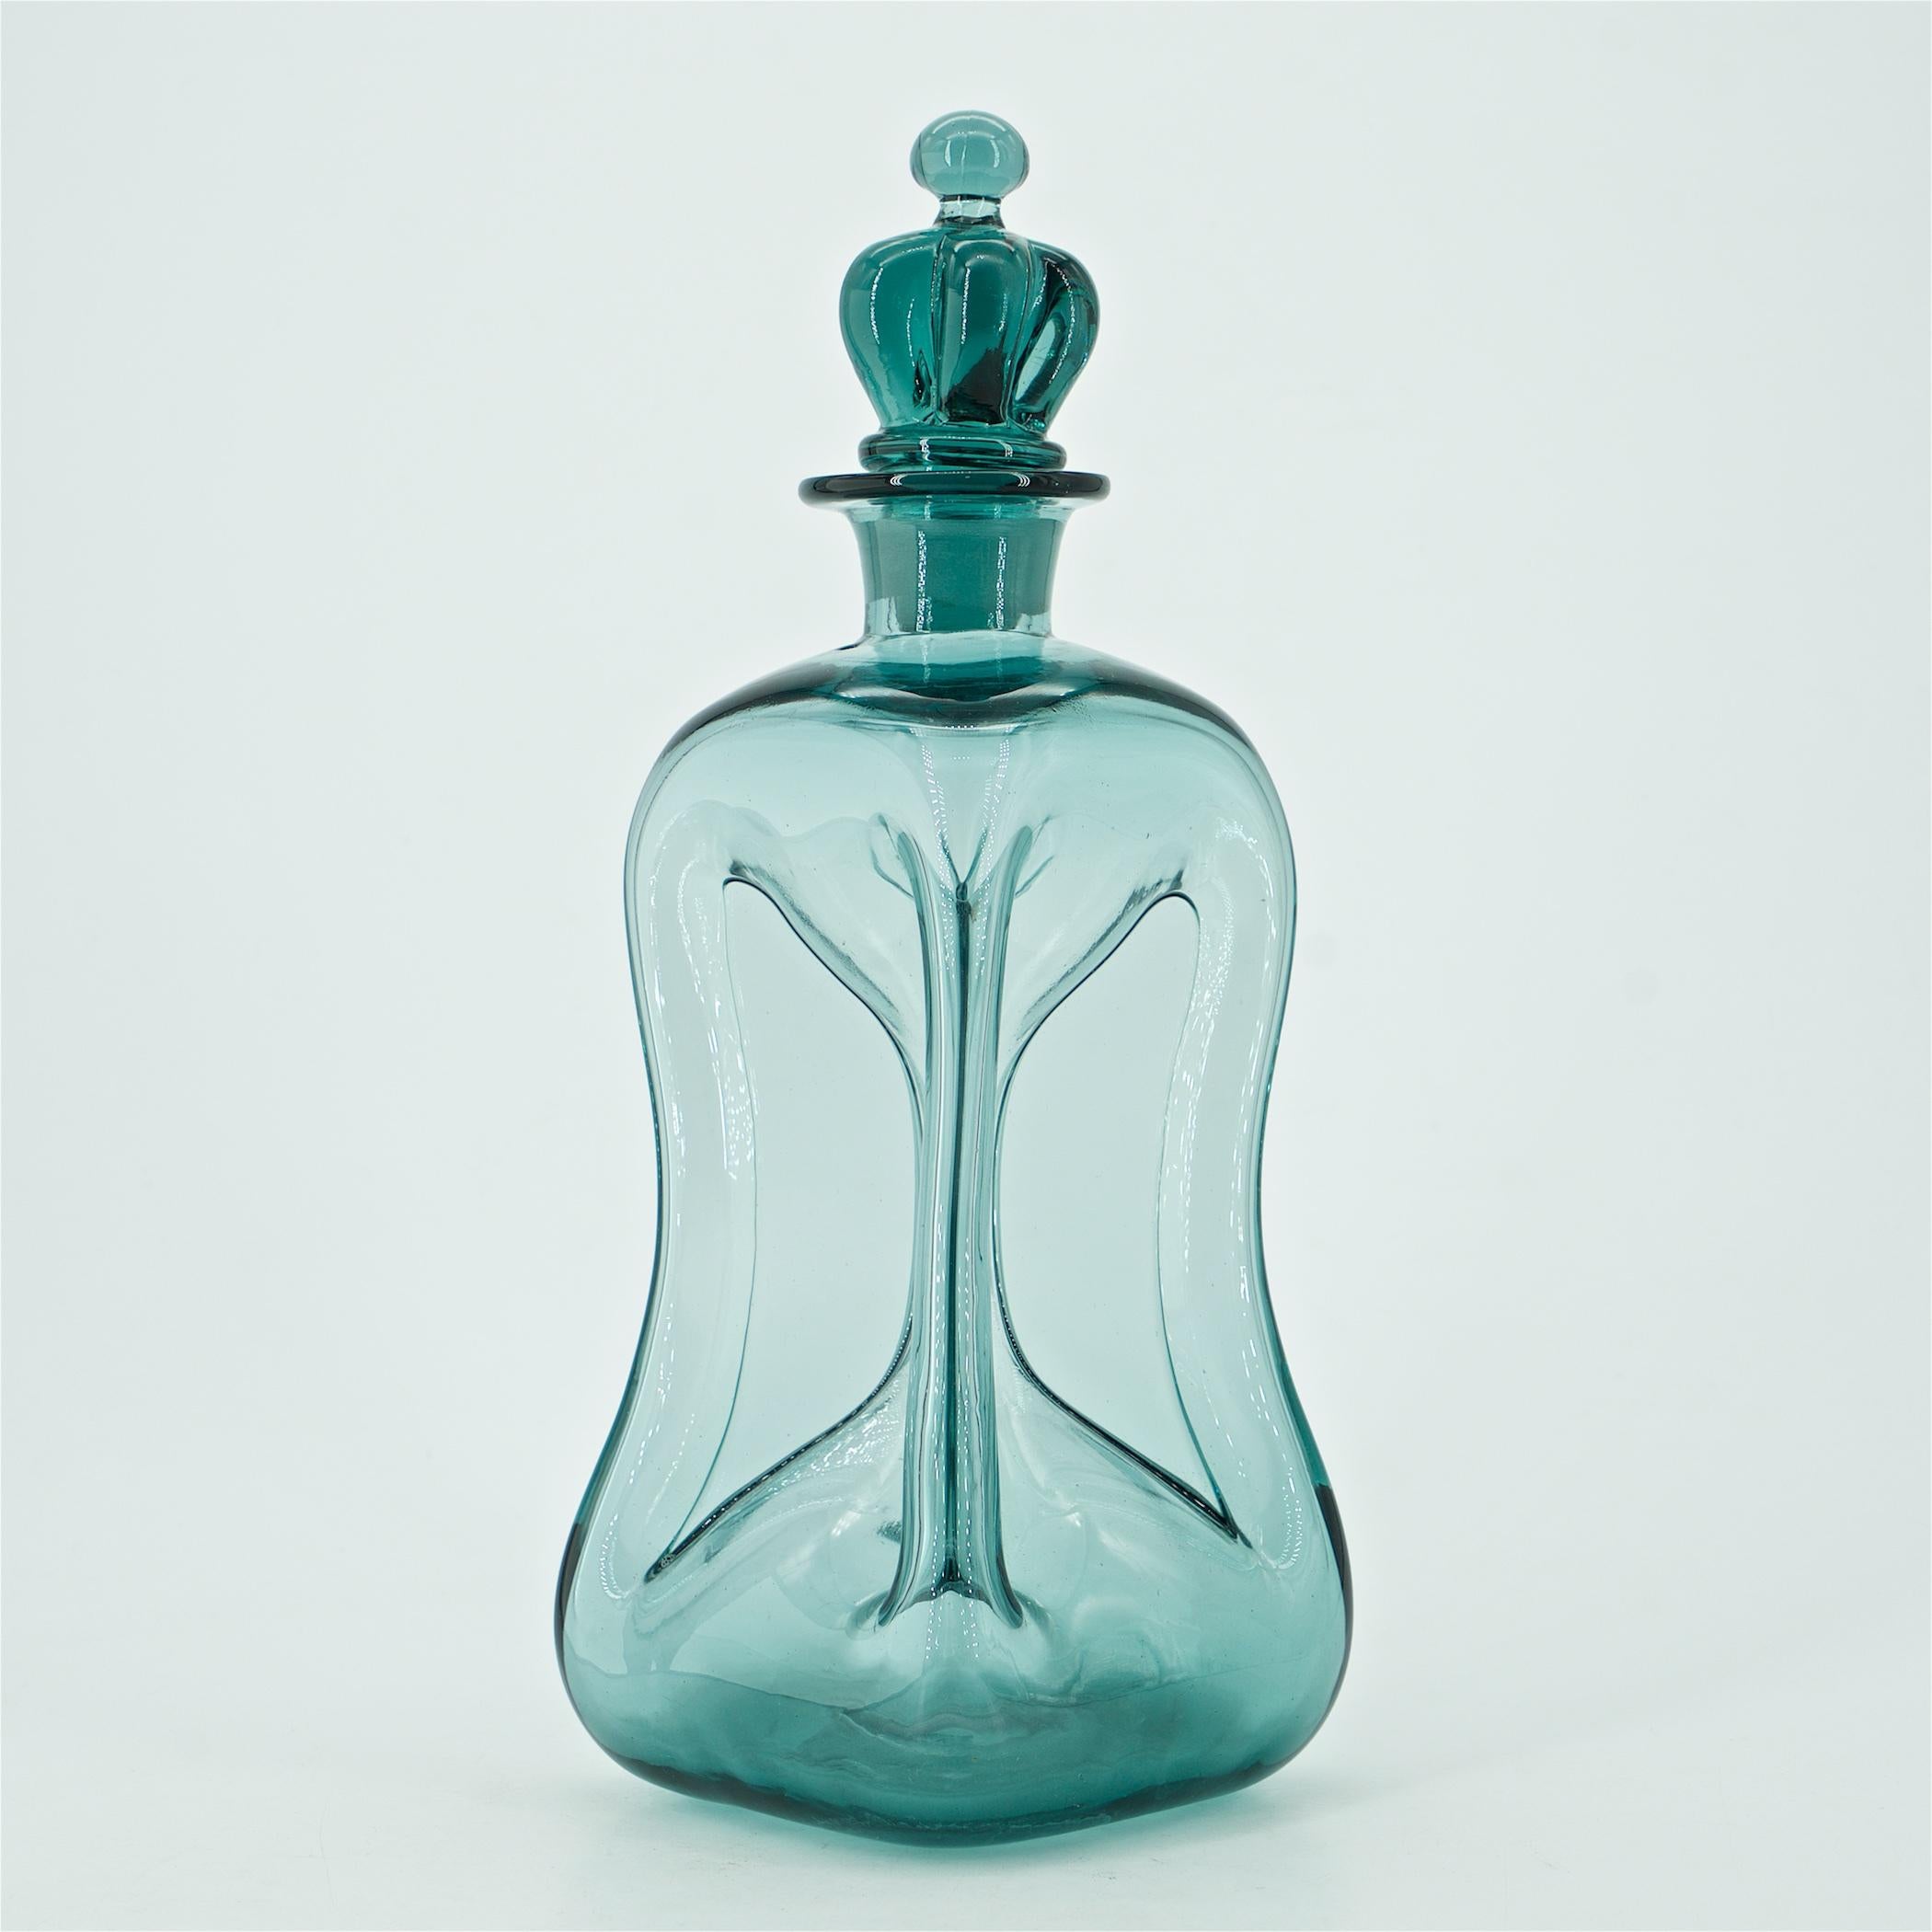 Liquid will fill into the edges of the pinched form, really beautiful design element. This Holmegaard smoke grey decanter was handmade, mouth-blown high quality art glass, with ground pontil mark on the bottom and rare original royal crown stopper,